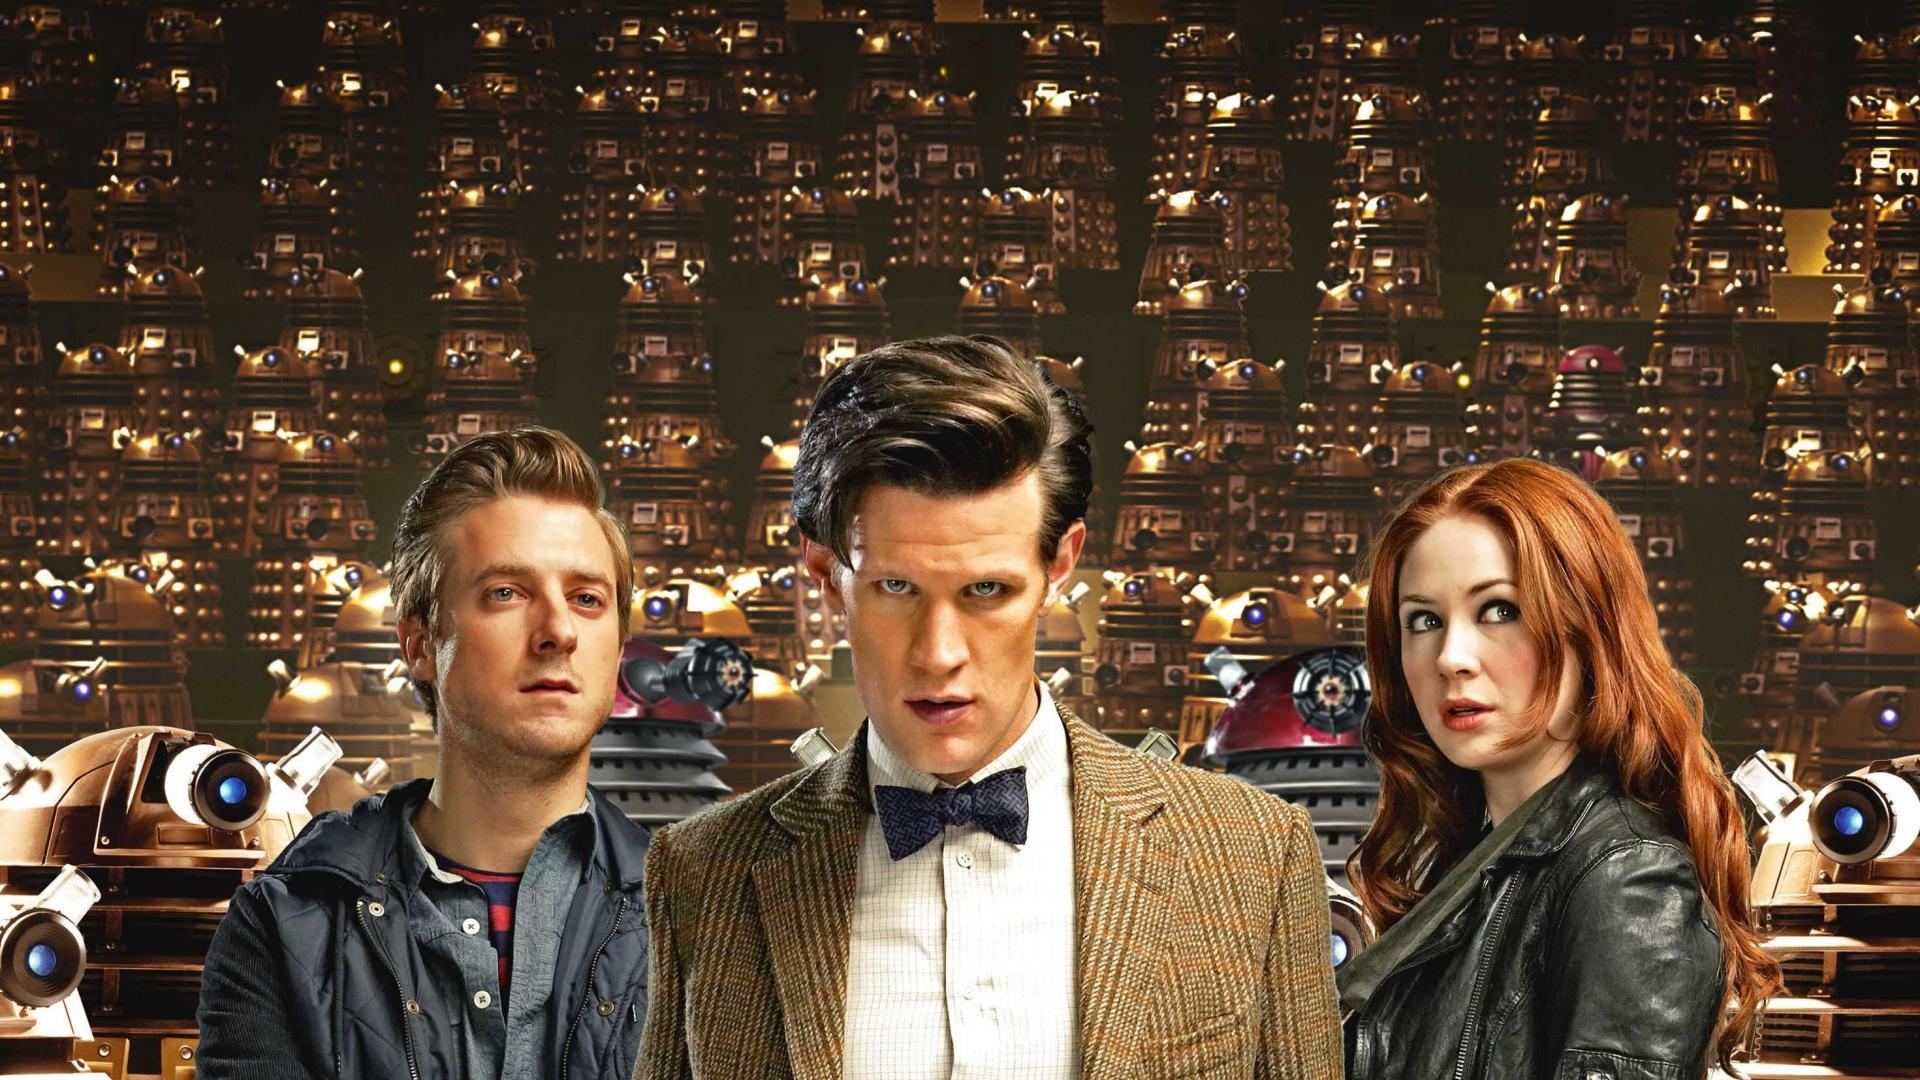 Amy pond eleventh doctor who rory williams wallpaper